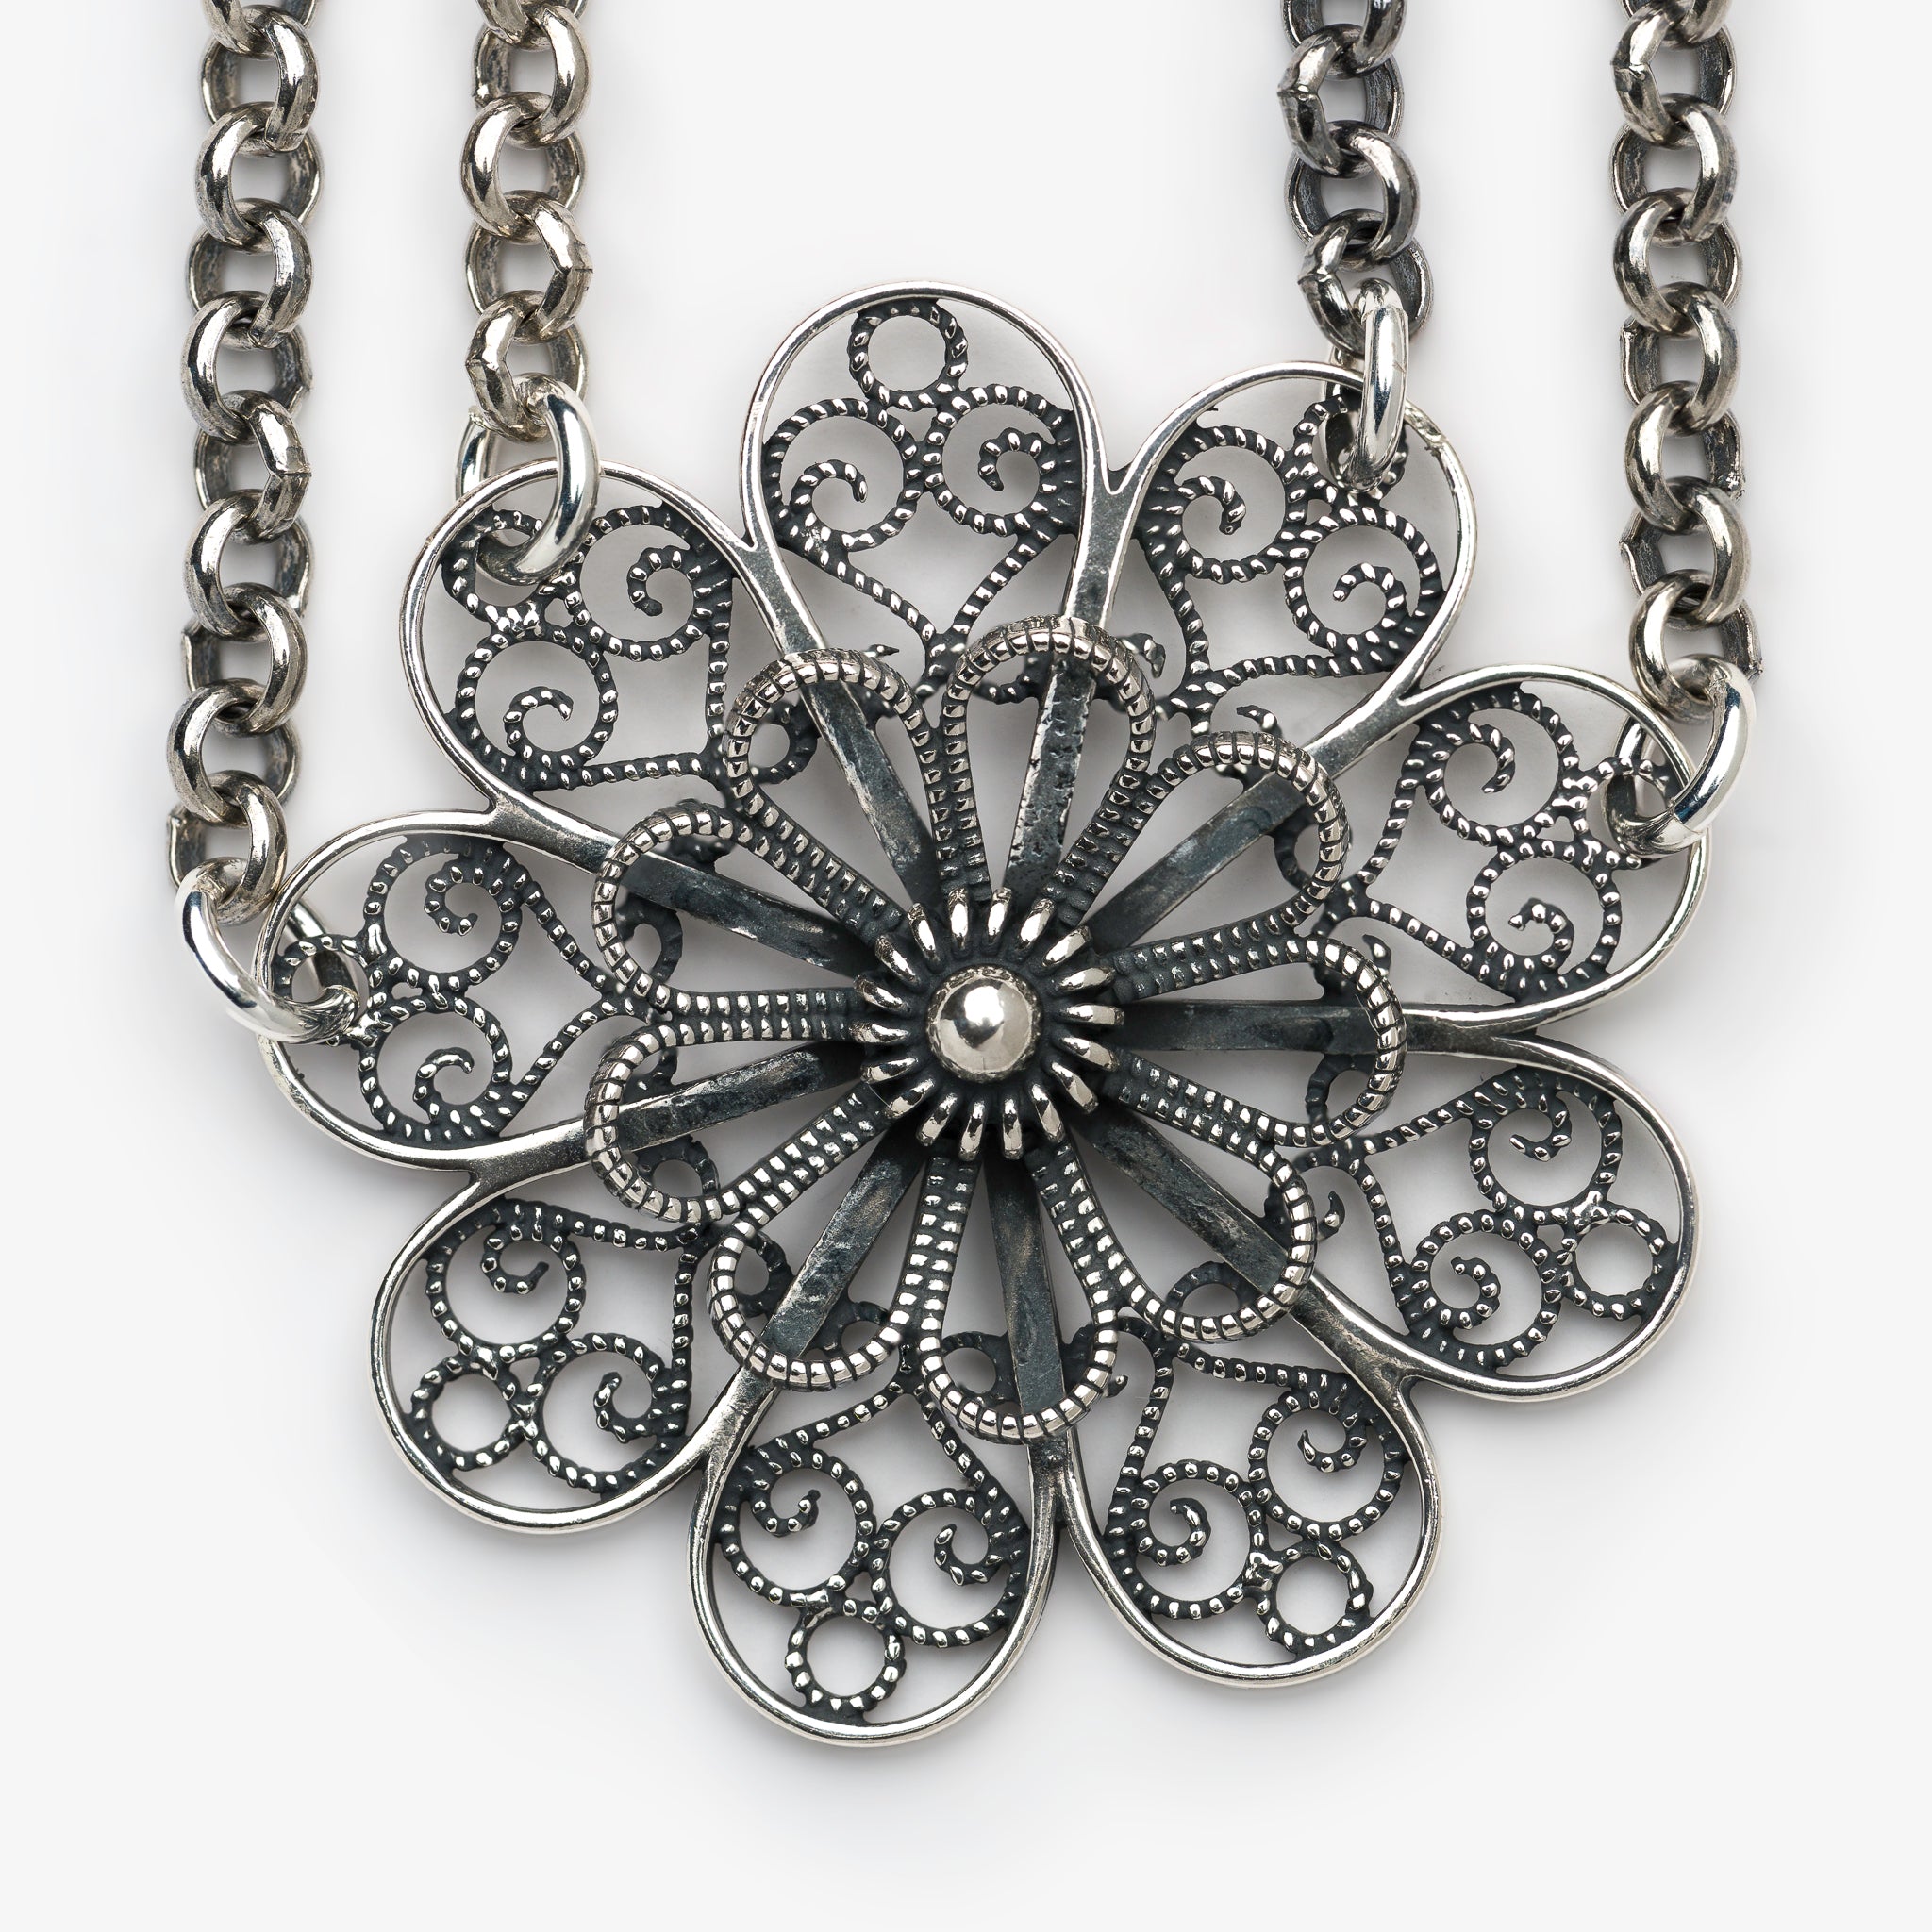 Necklace with Double Chain and Pendant by Sylvsmidja